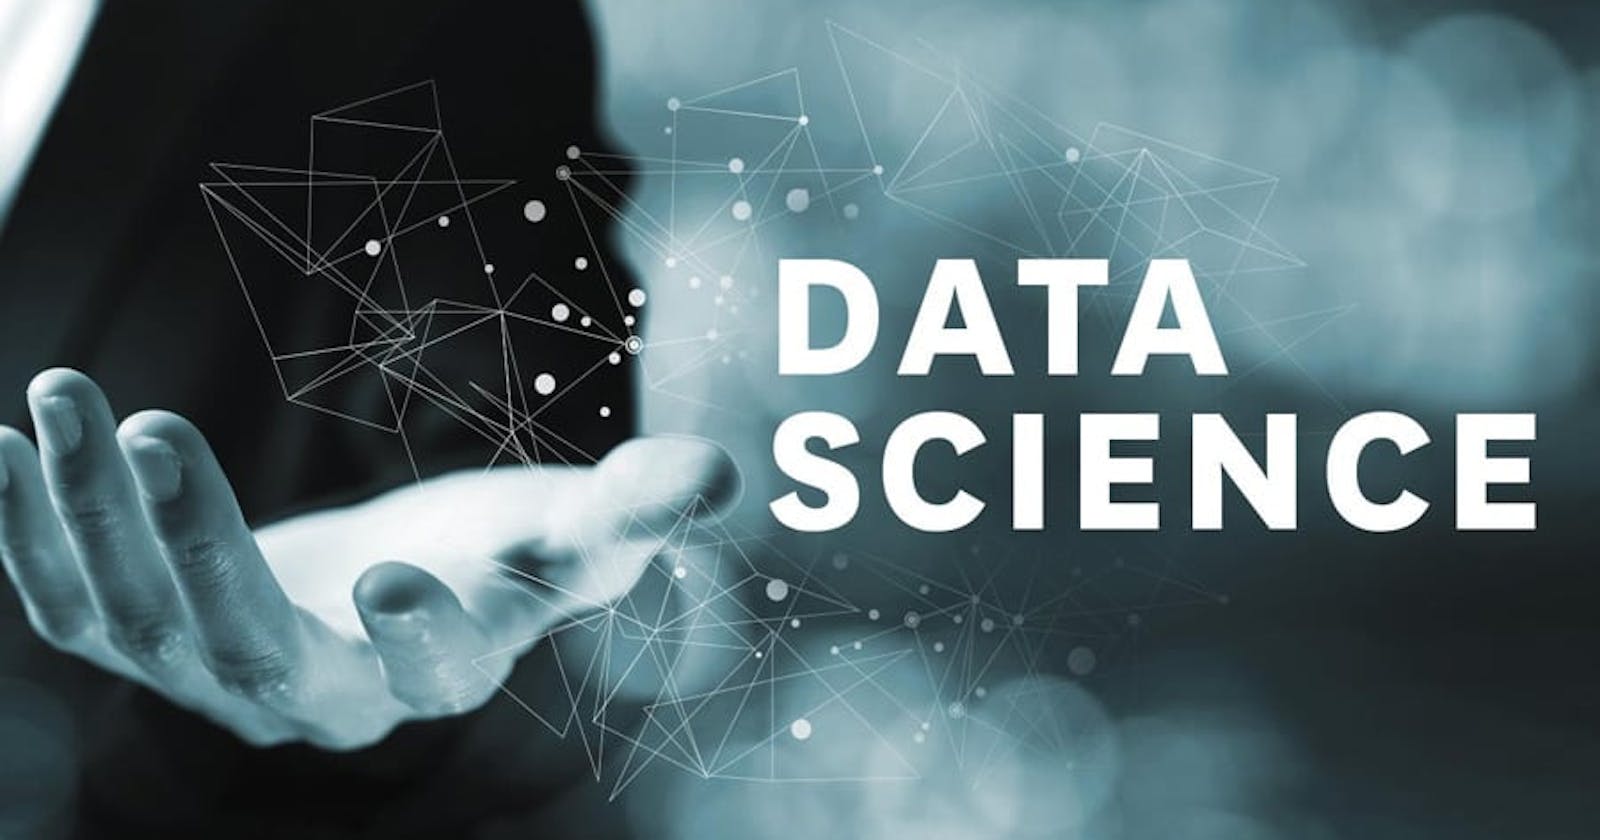 Need More Time? Read These Tips To Eliminate THE SCIENCE OF DATA